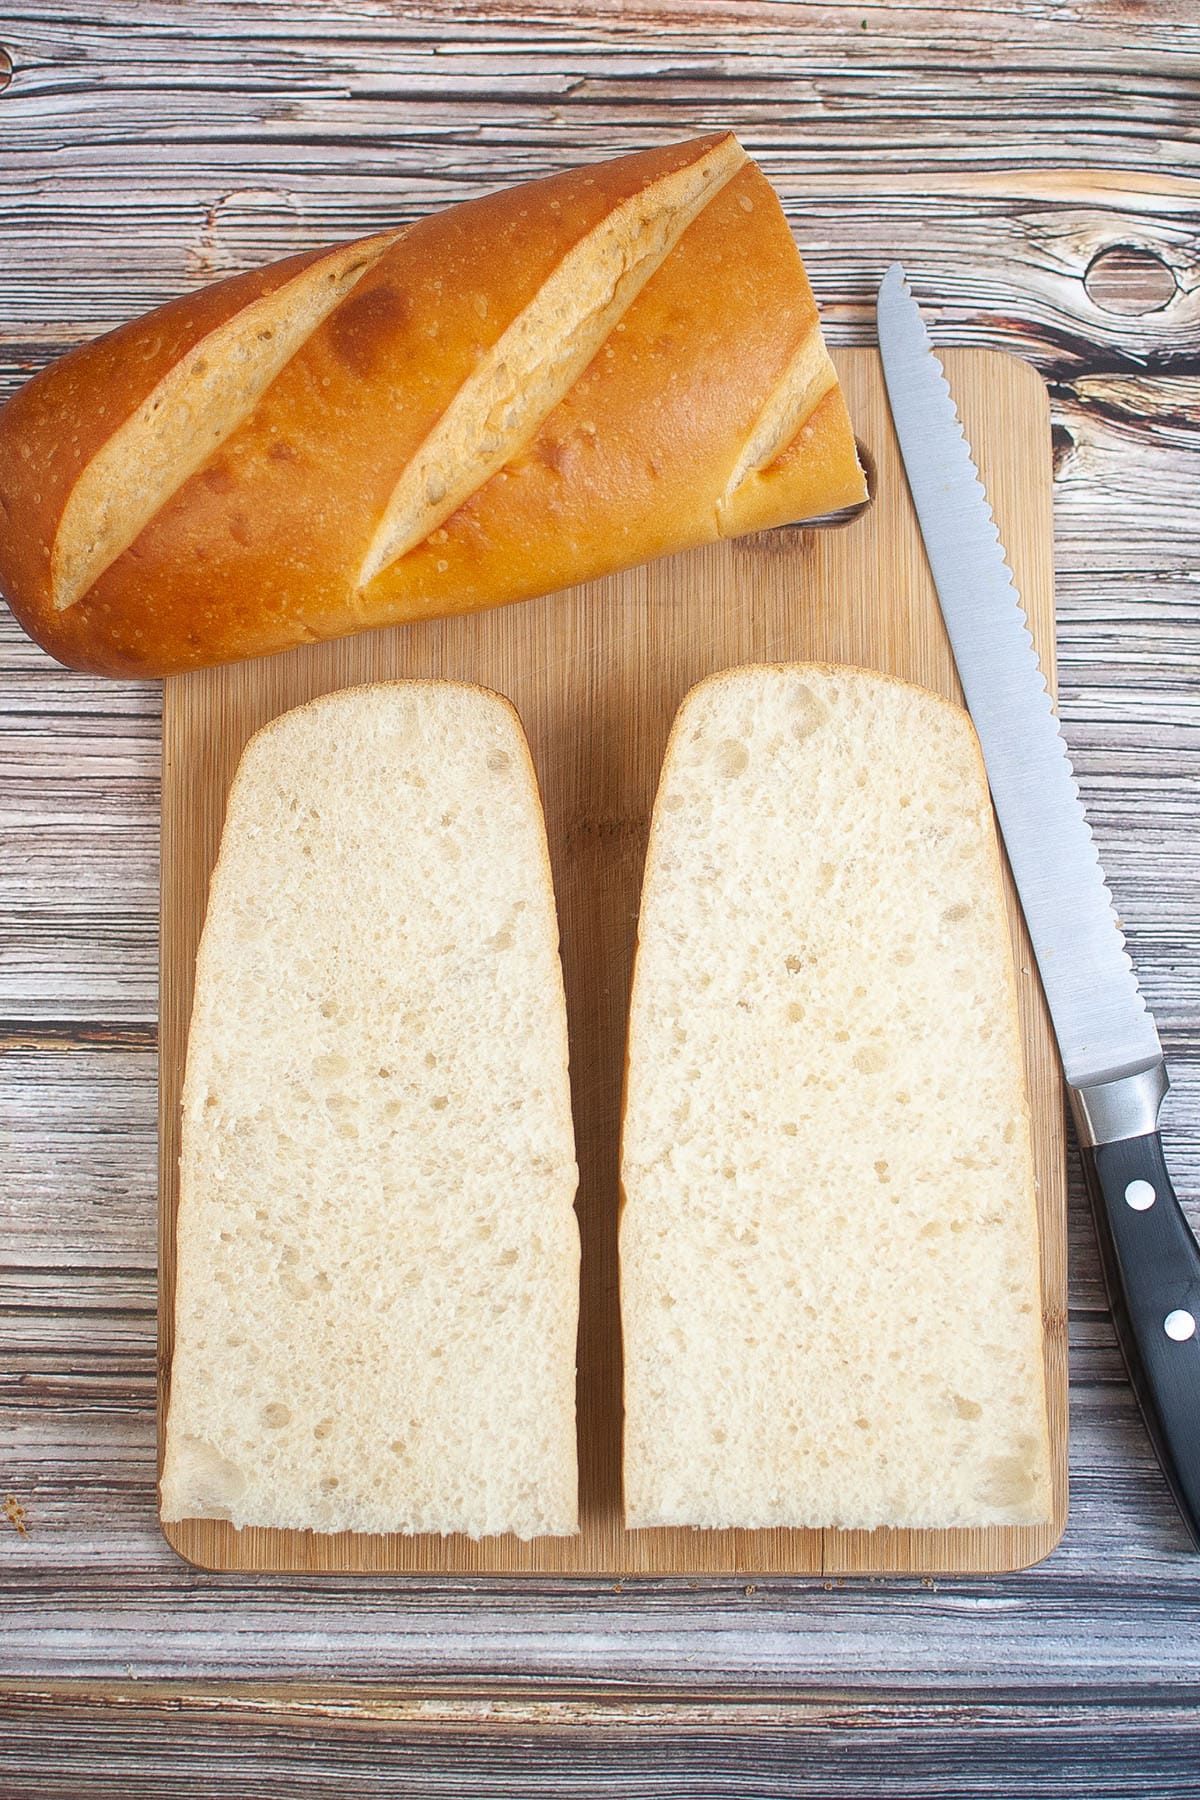 French bread cut in half lengthwise in wood chopping board and bread knife